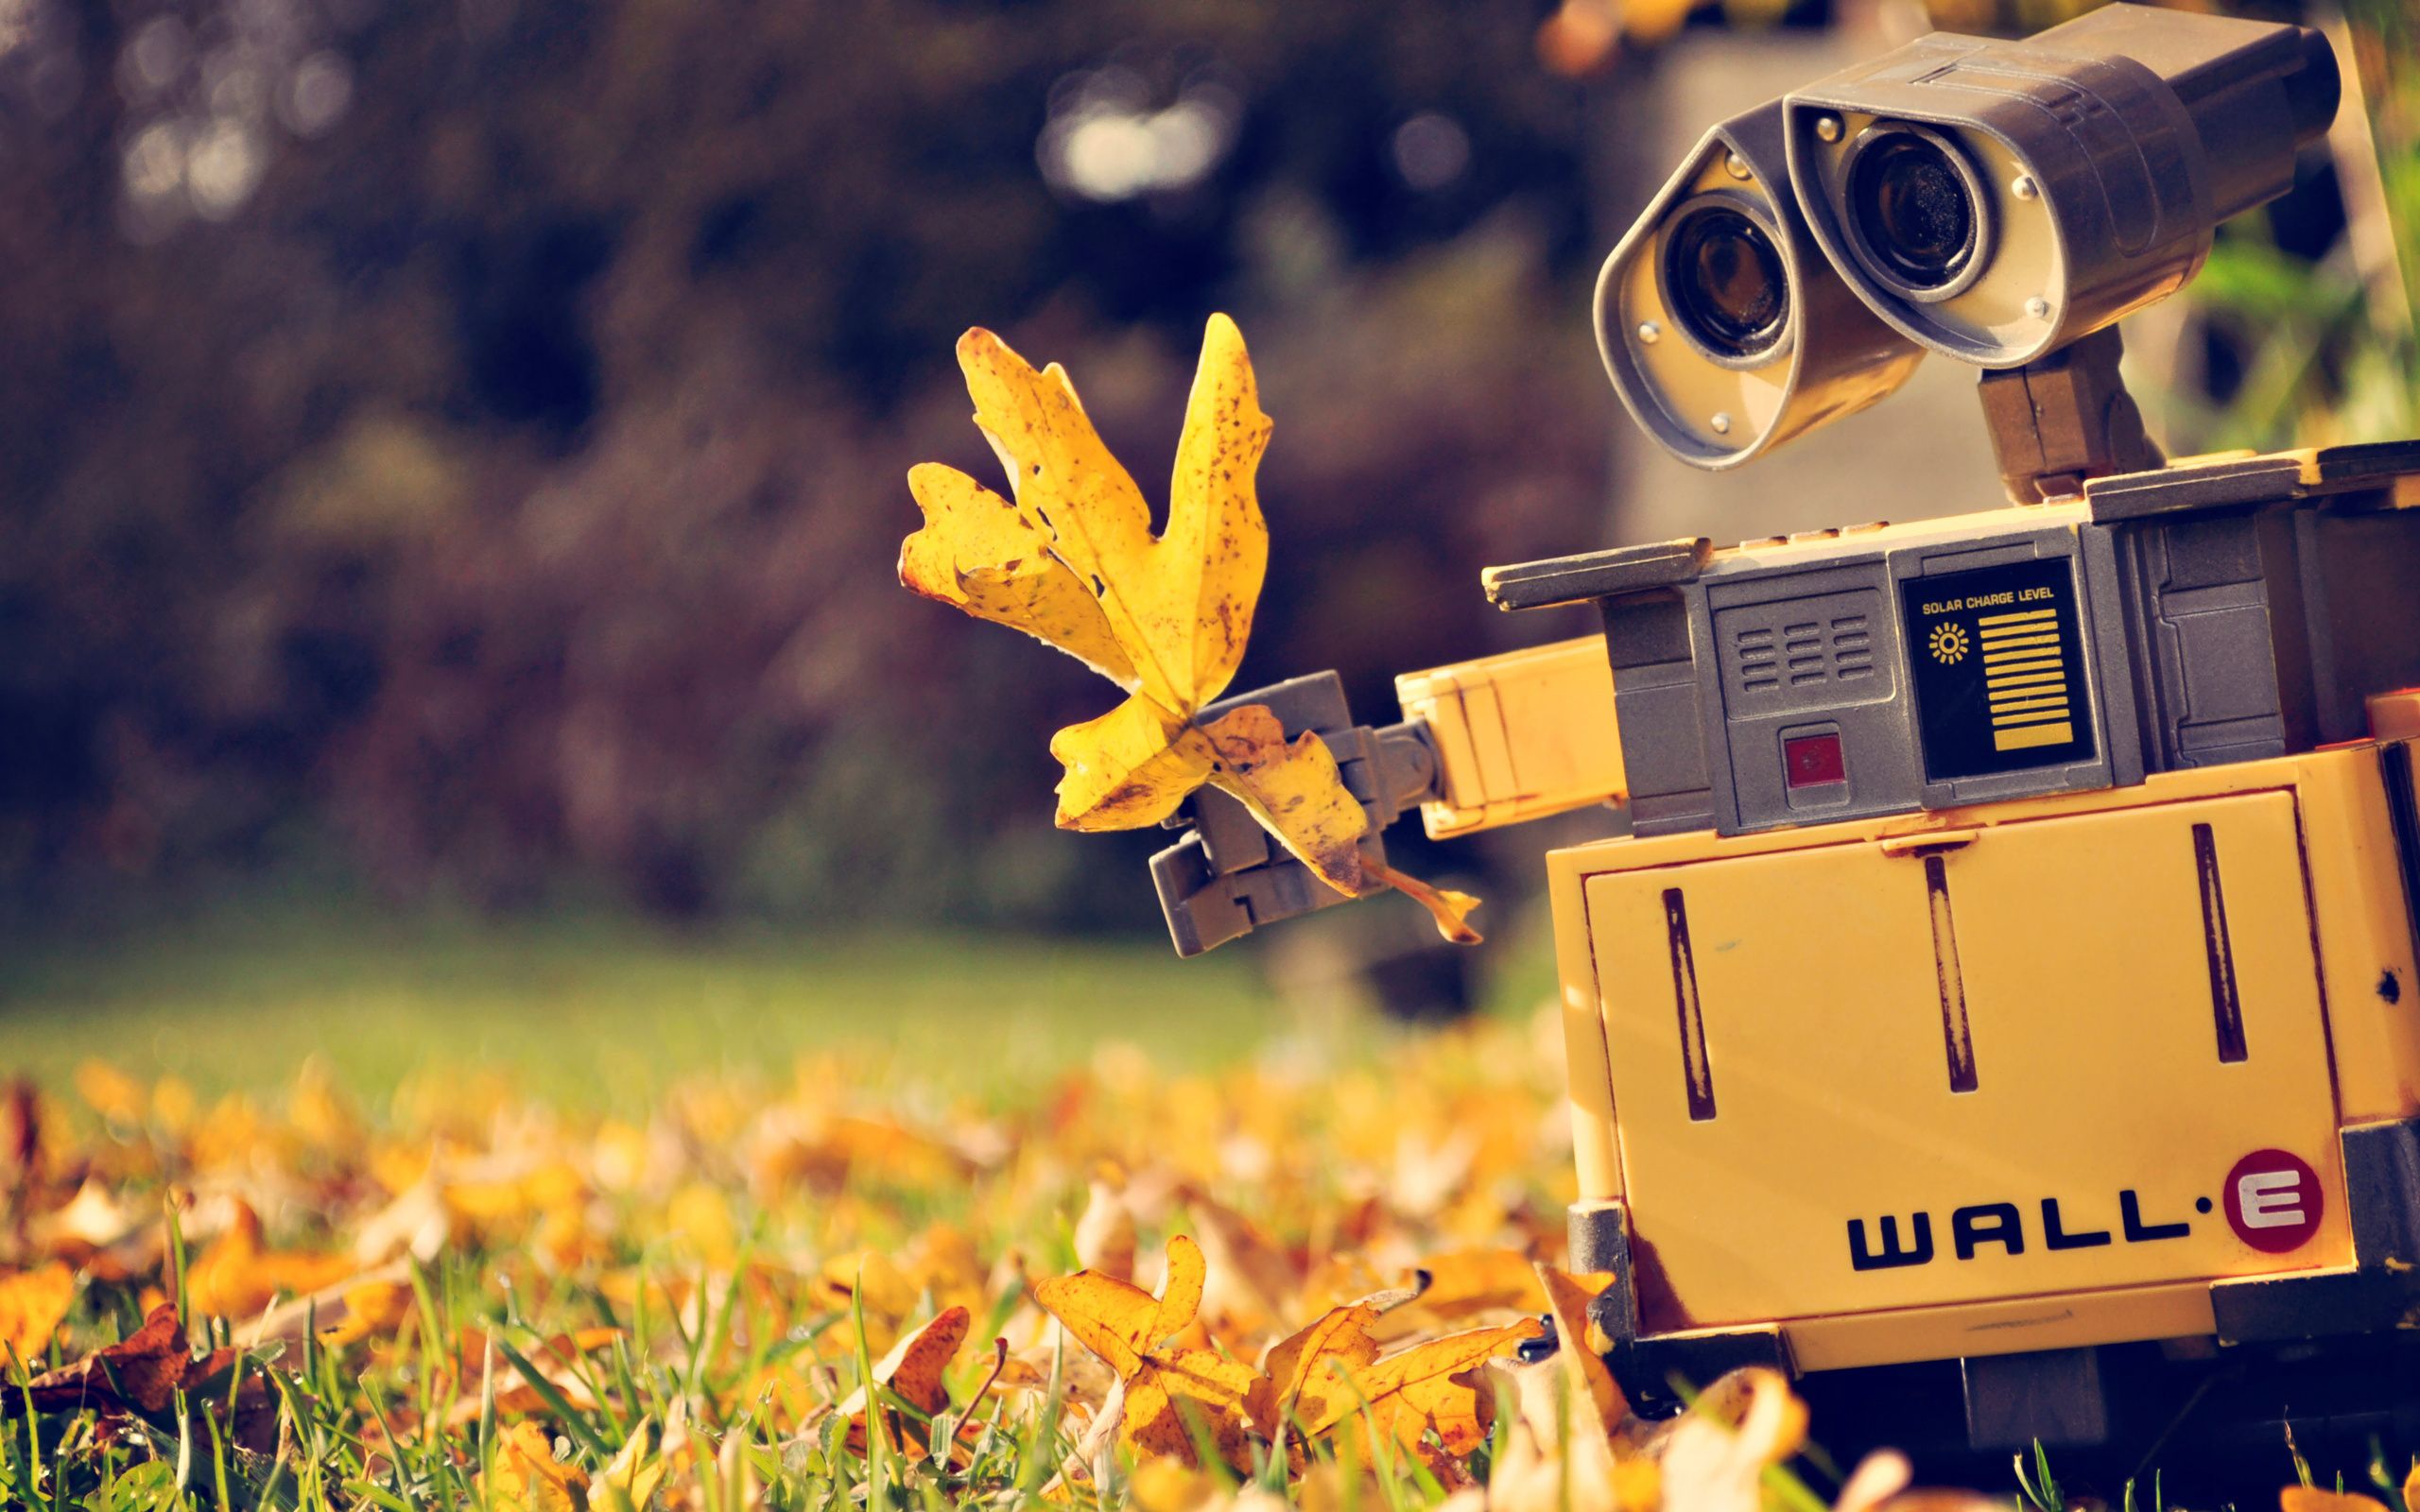 Free download Wall E Wallpaper High Quality Download 2560x1600